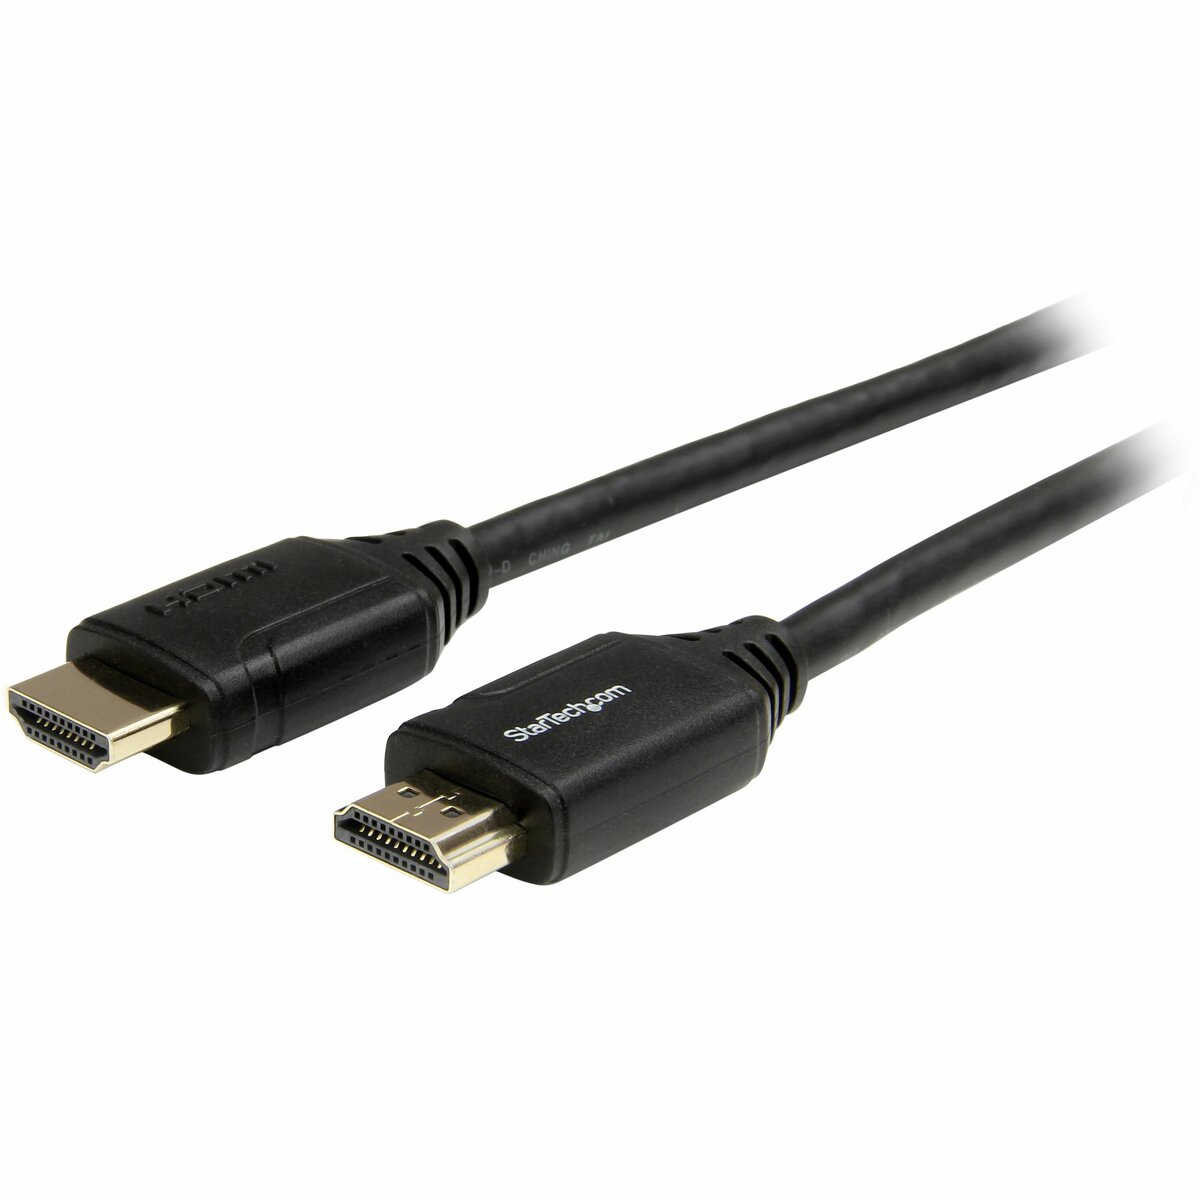 Portable 1m/50cm USB 2.0 Male to Female Data Transfer Extension Cable  Accessories Cables for iPhone